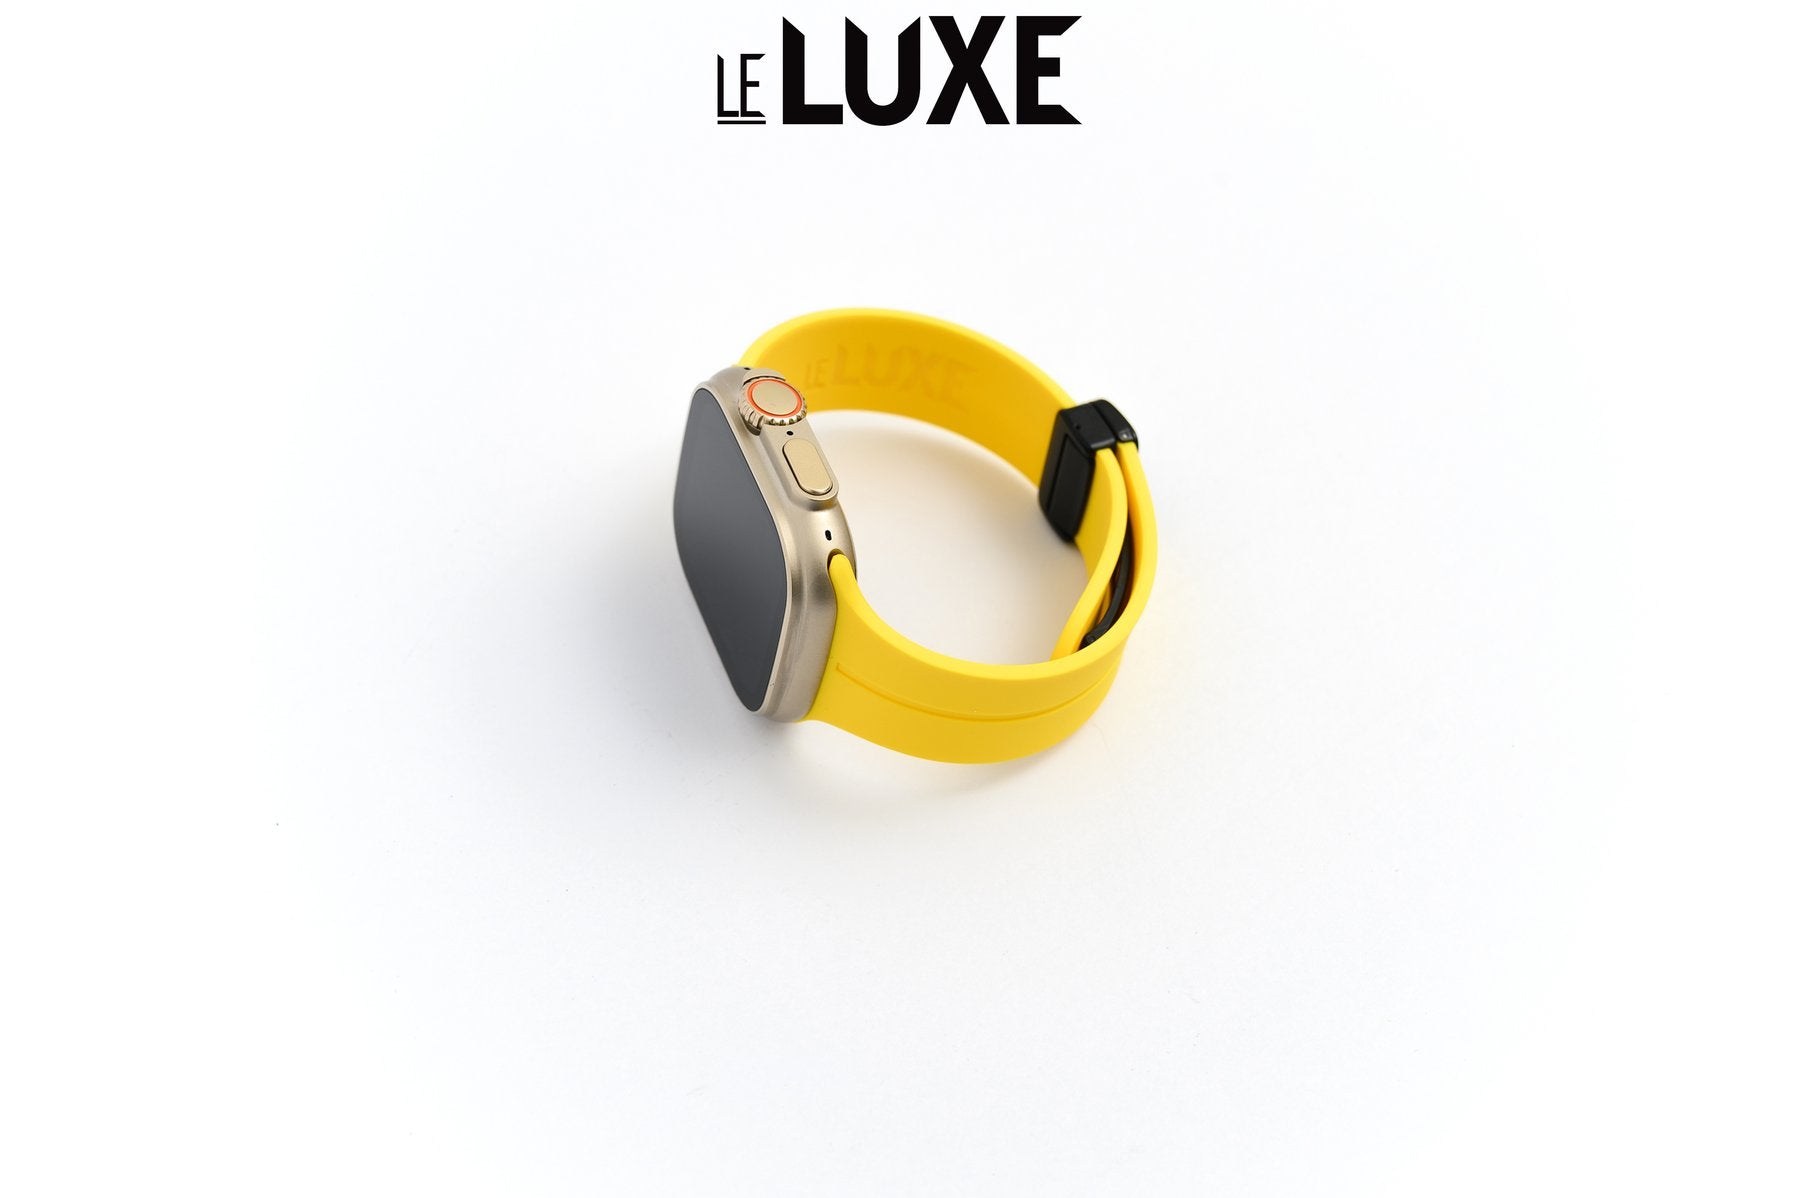 Le Luxe Straps  Luxury Camo Leather Exotic Apple Watch Straps